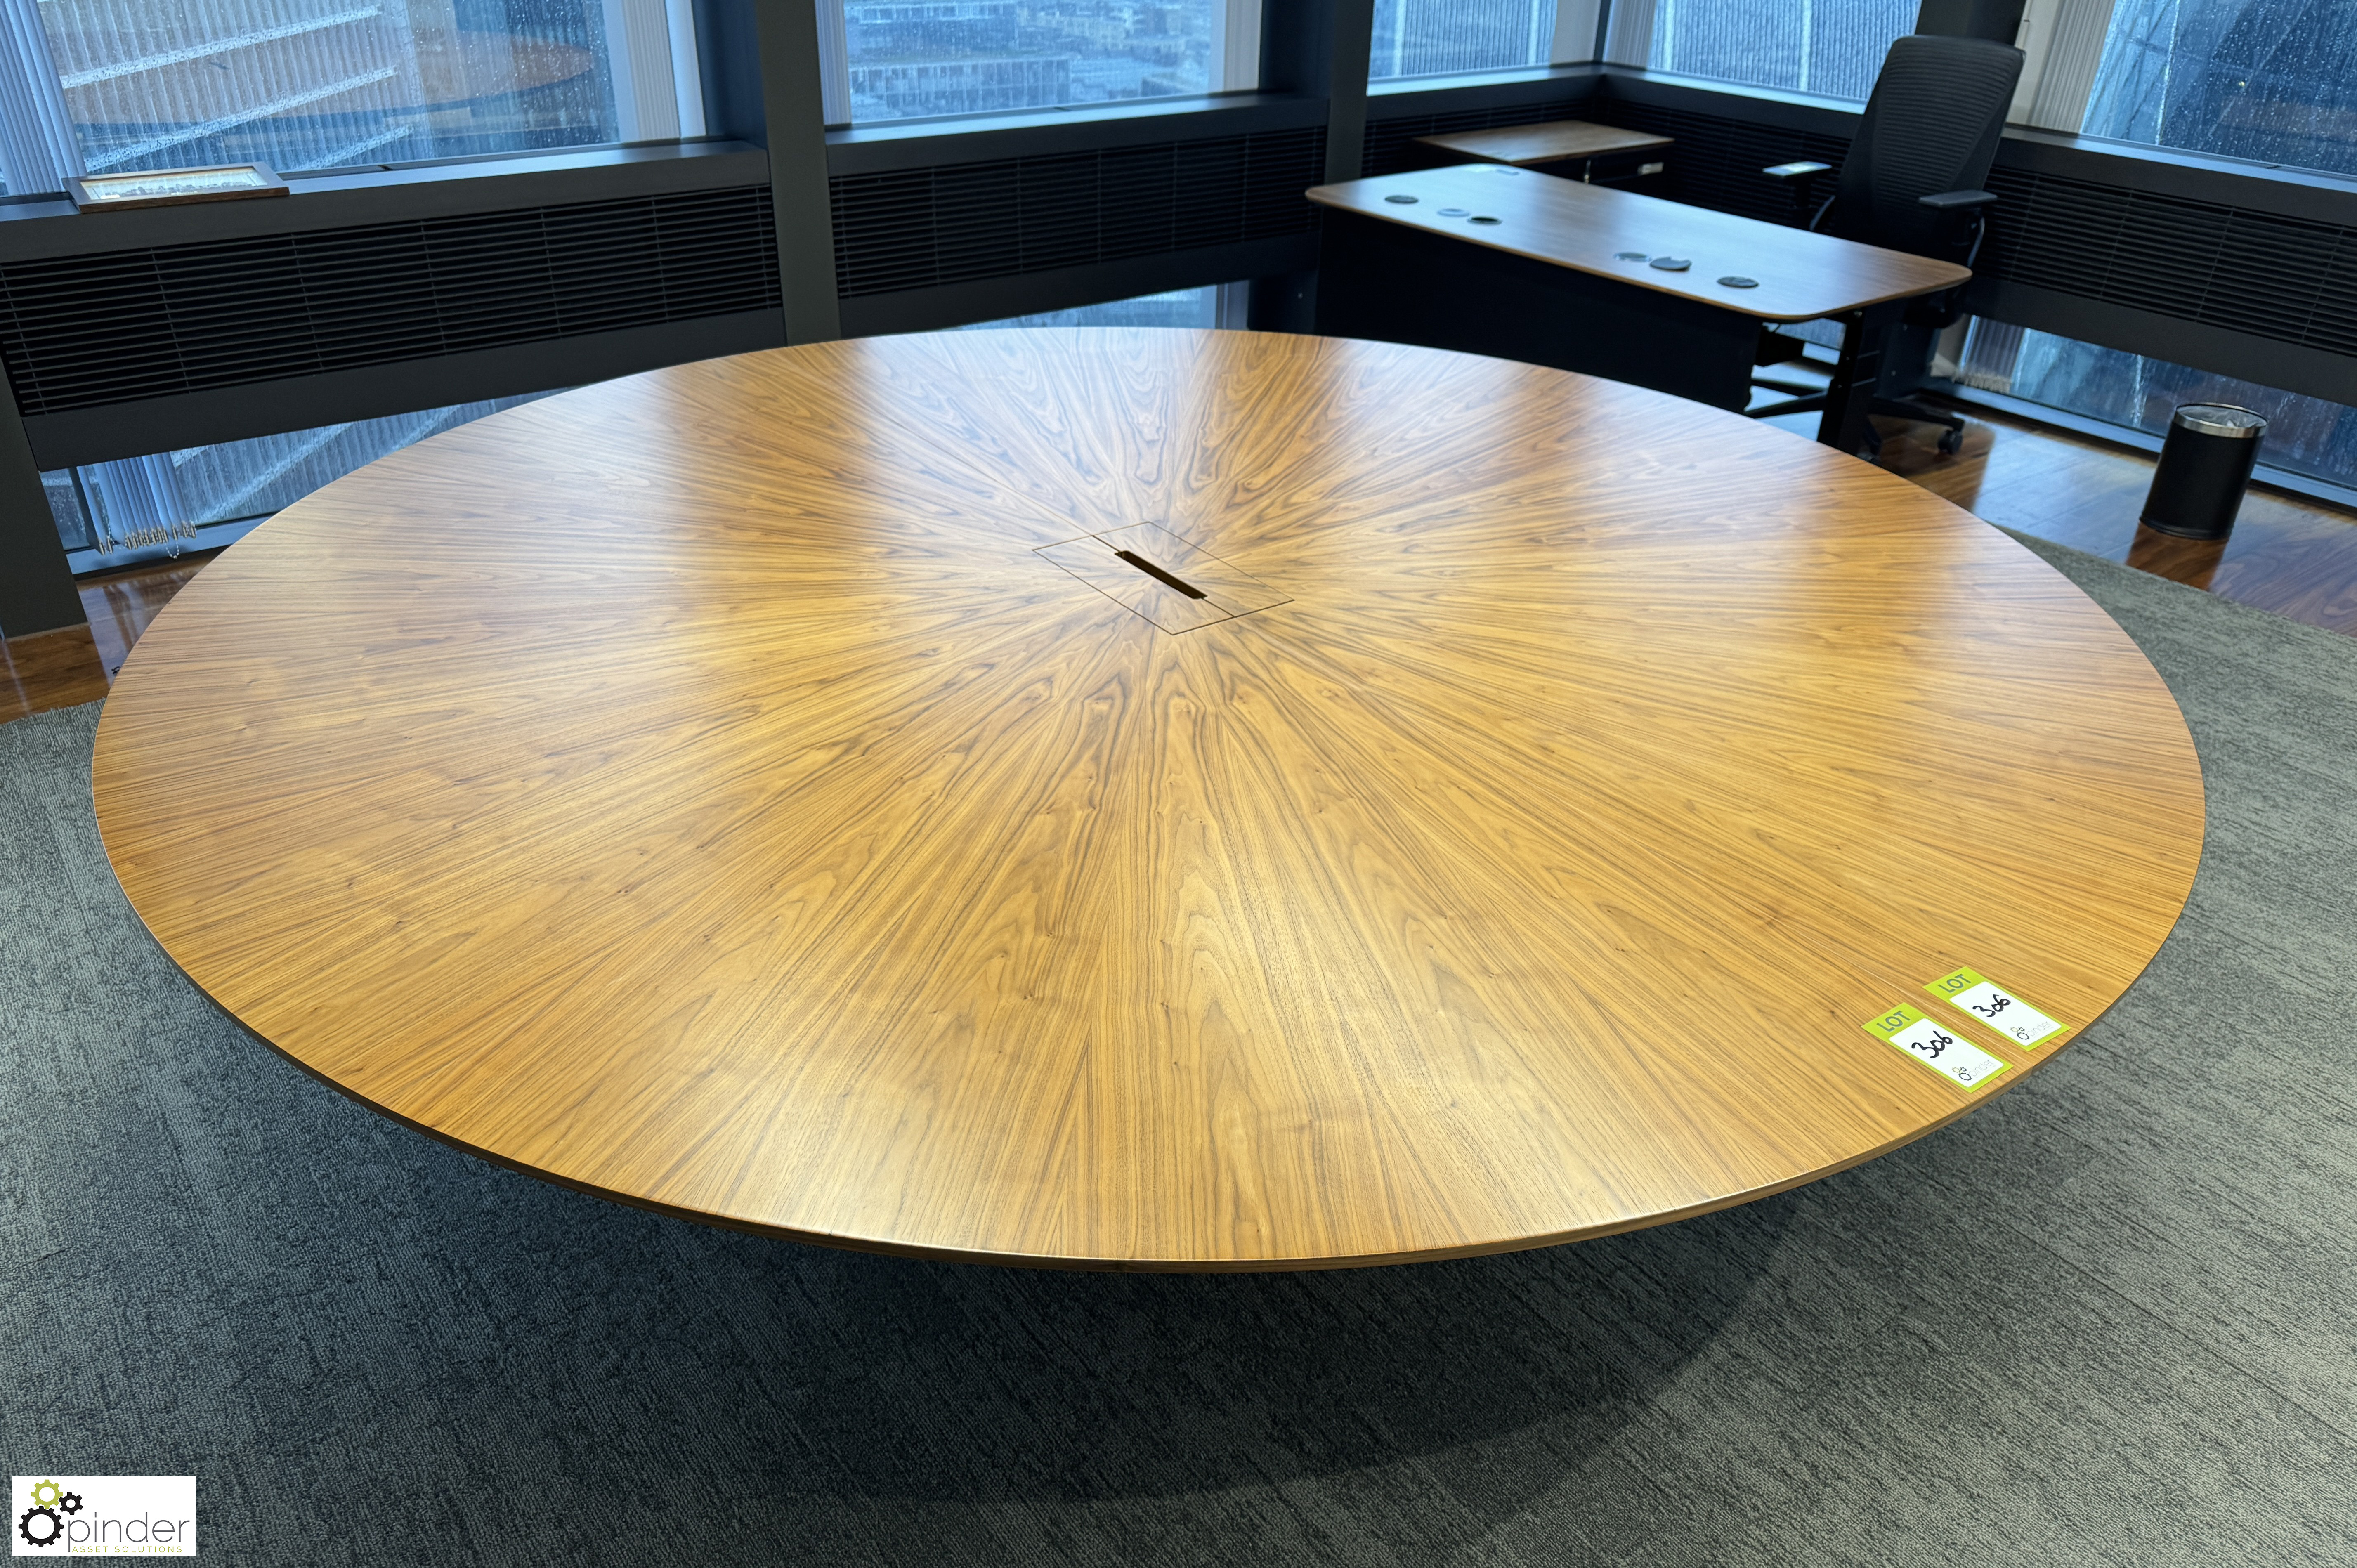 Cherry veneer circular Meeting Table, 2600mm diameter x 800mm, with cable management and central - Image 2 of 7